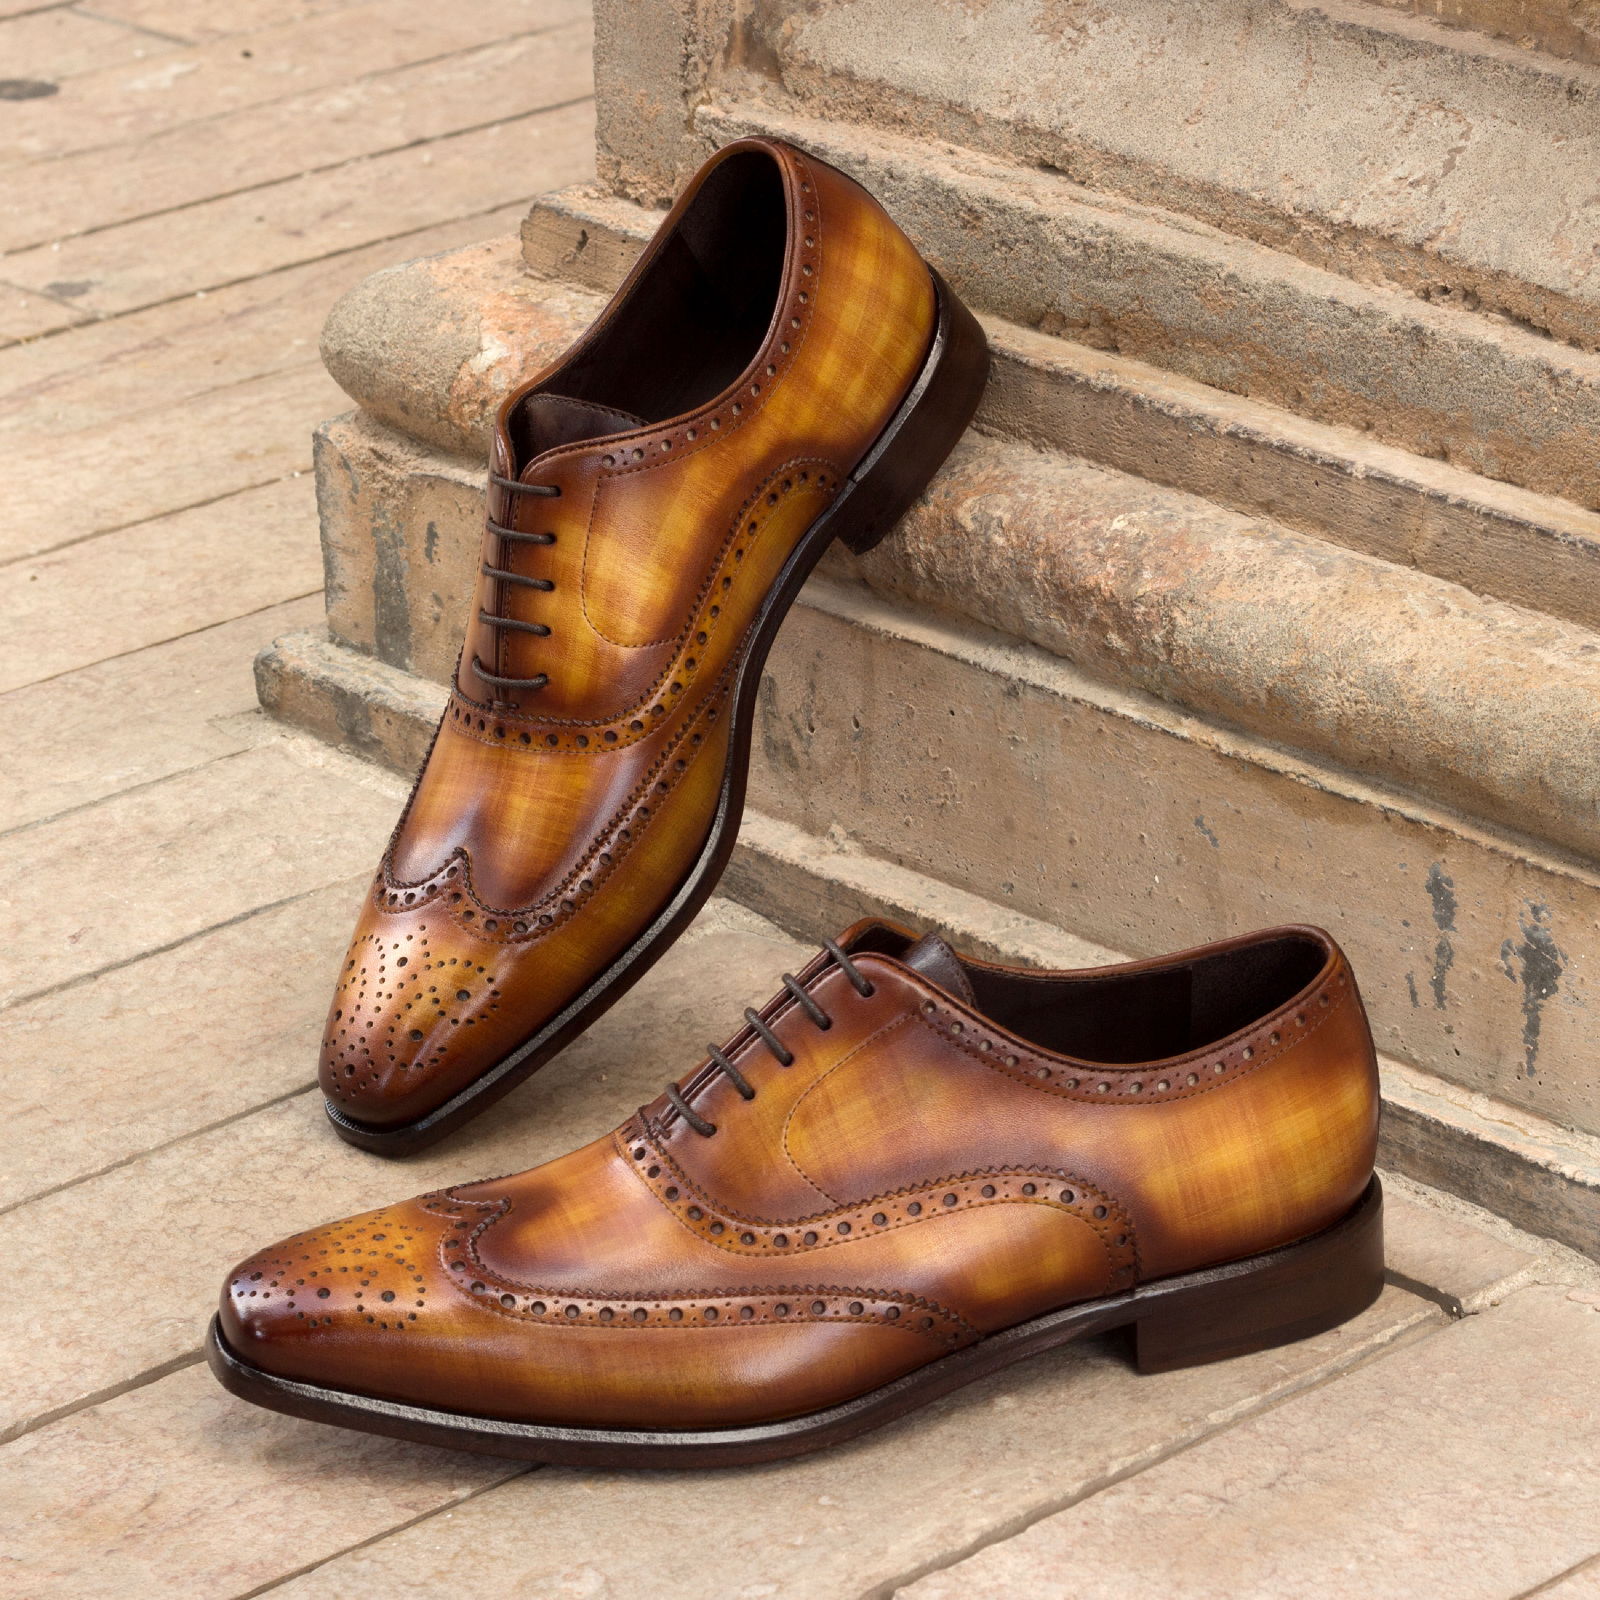 Animas Code | Made to Order Bespoke Shoes Handcrafted in Spain